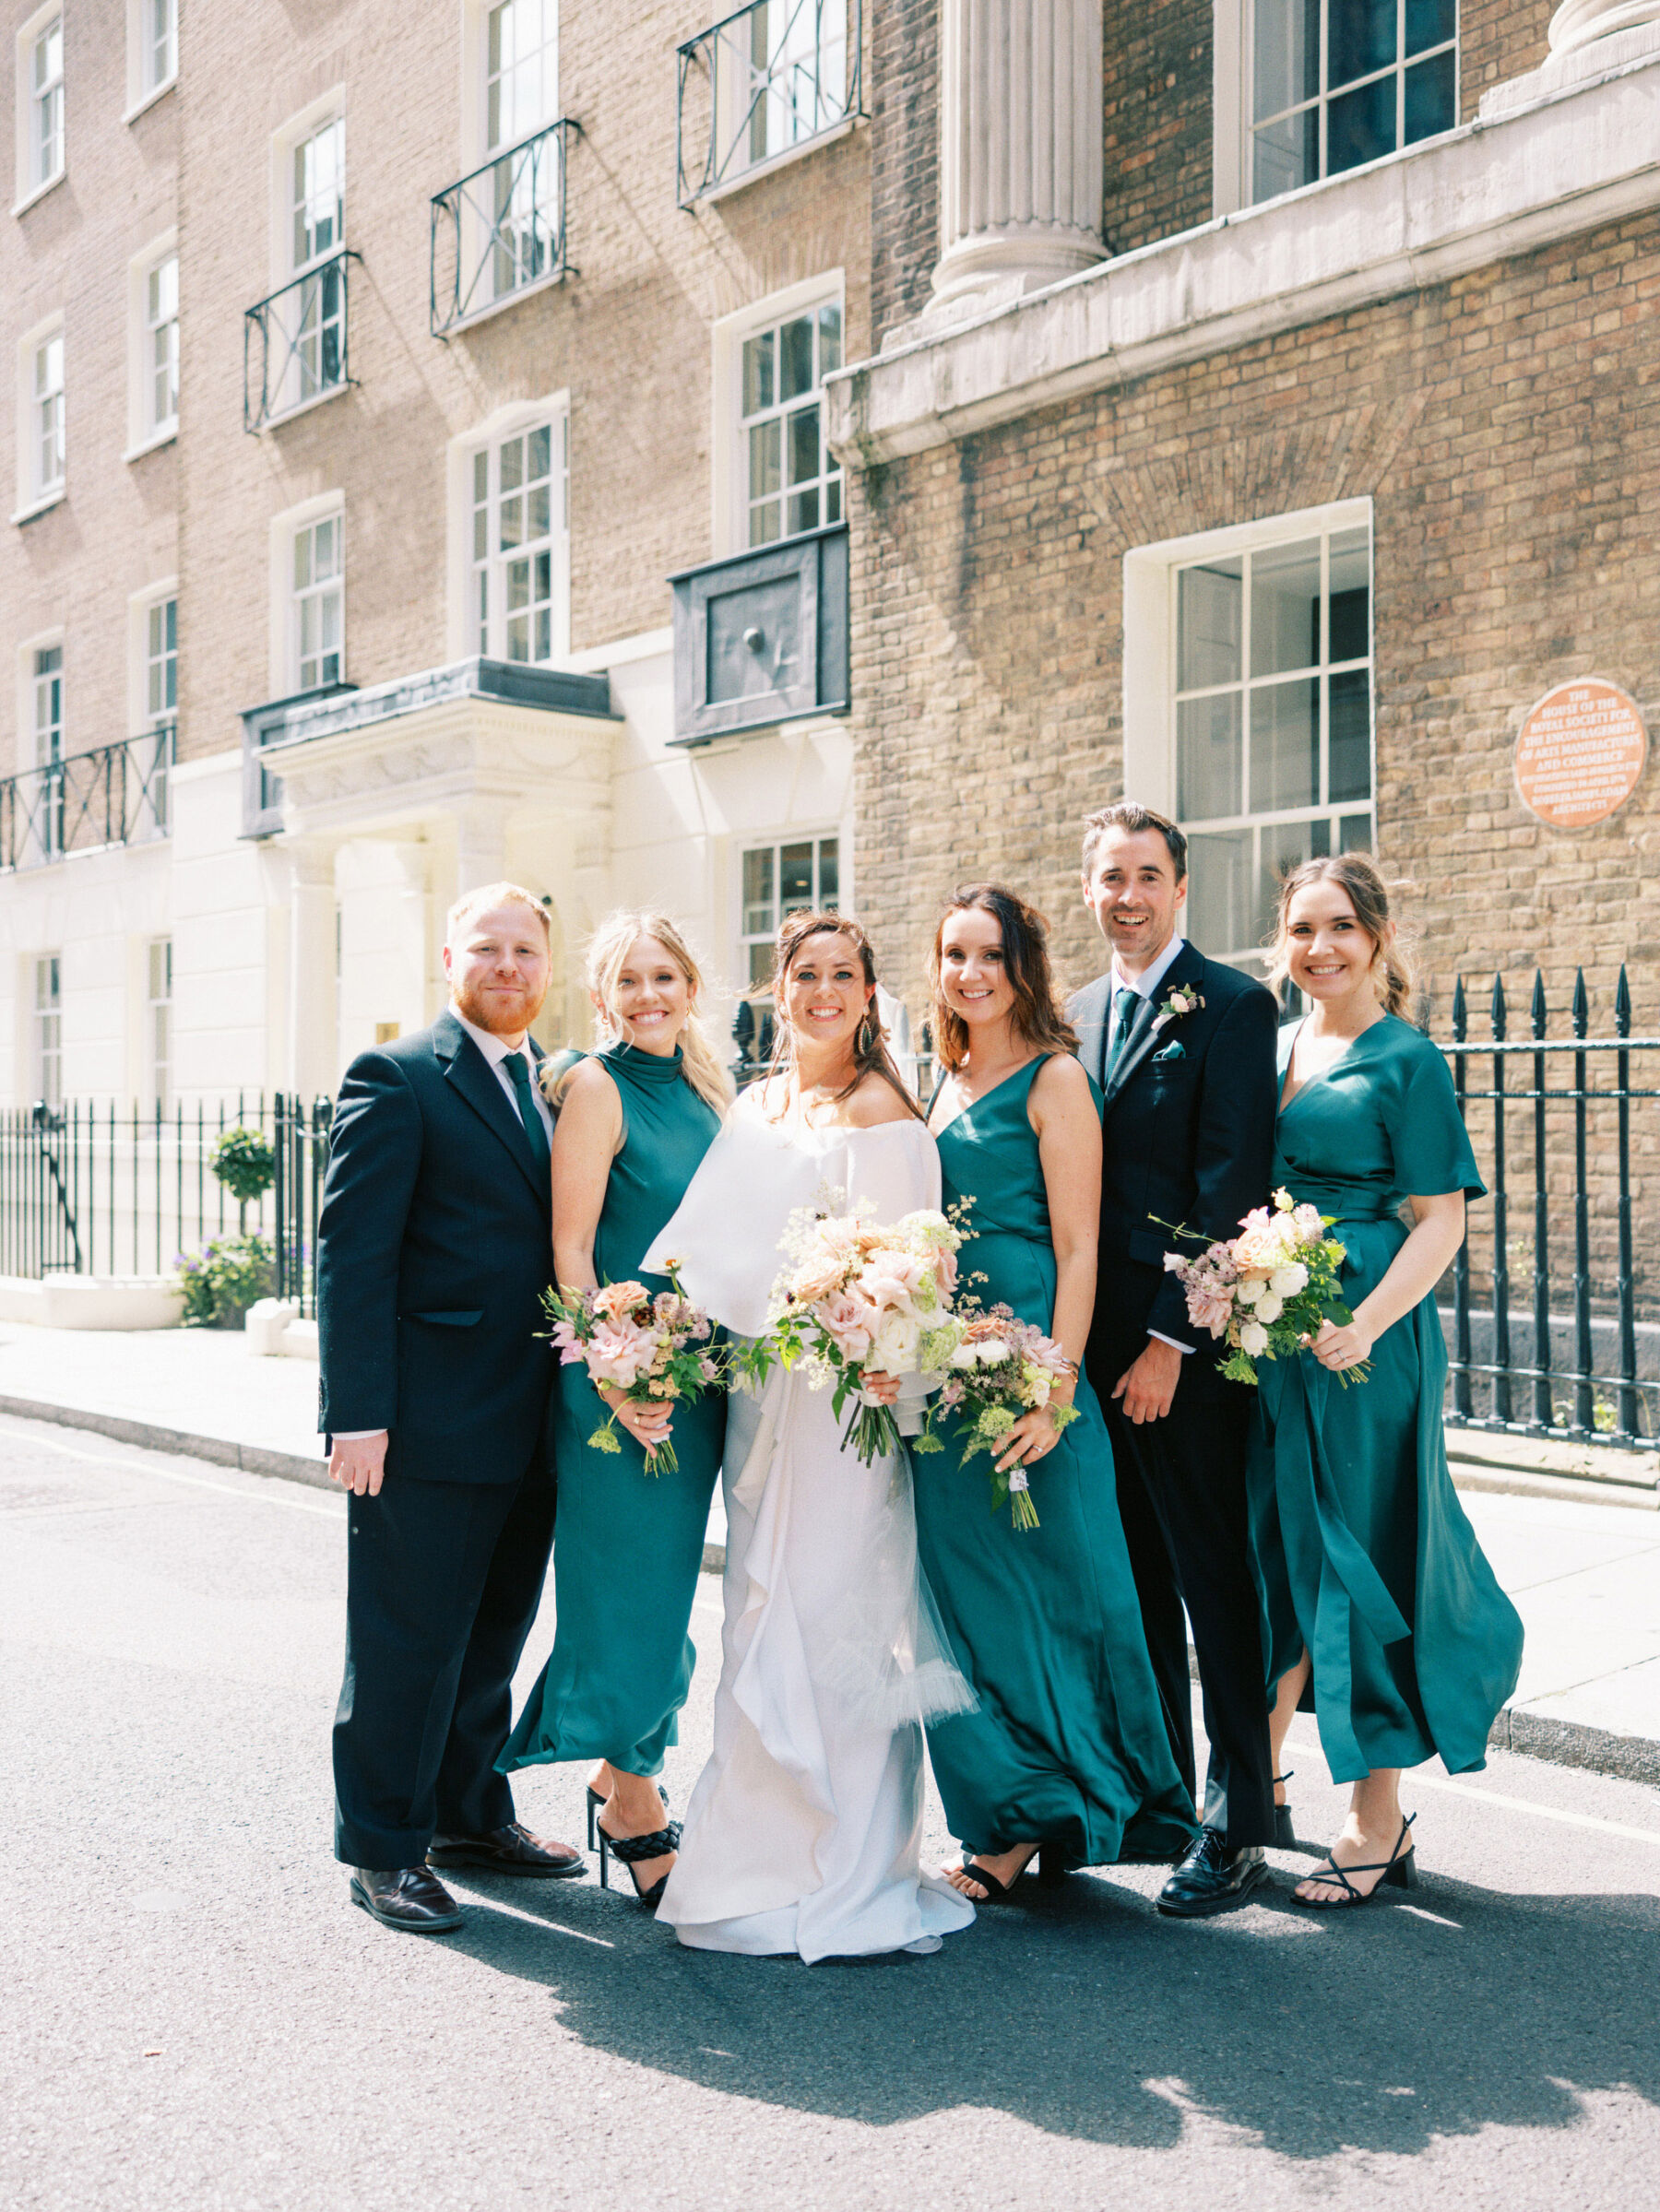 Bridesmaids in emerald green dresses by The Own Studio